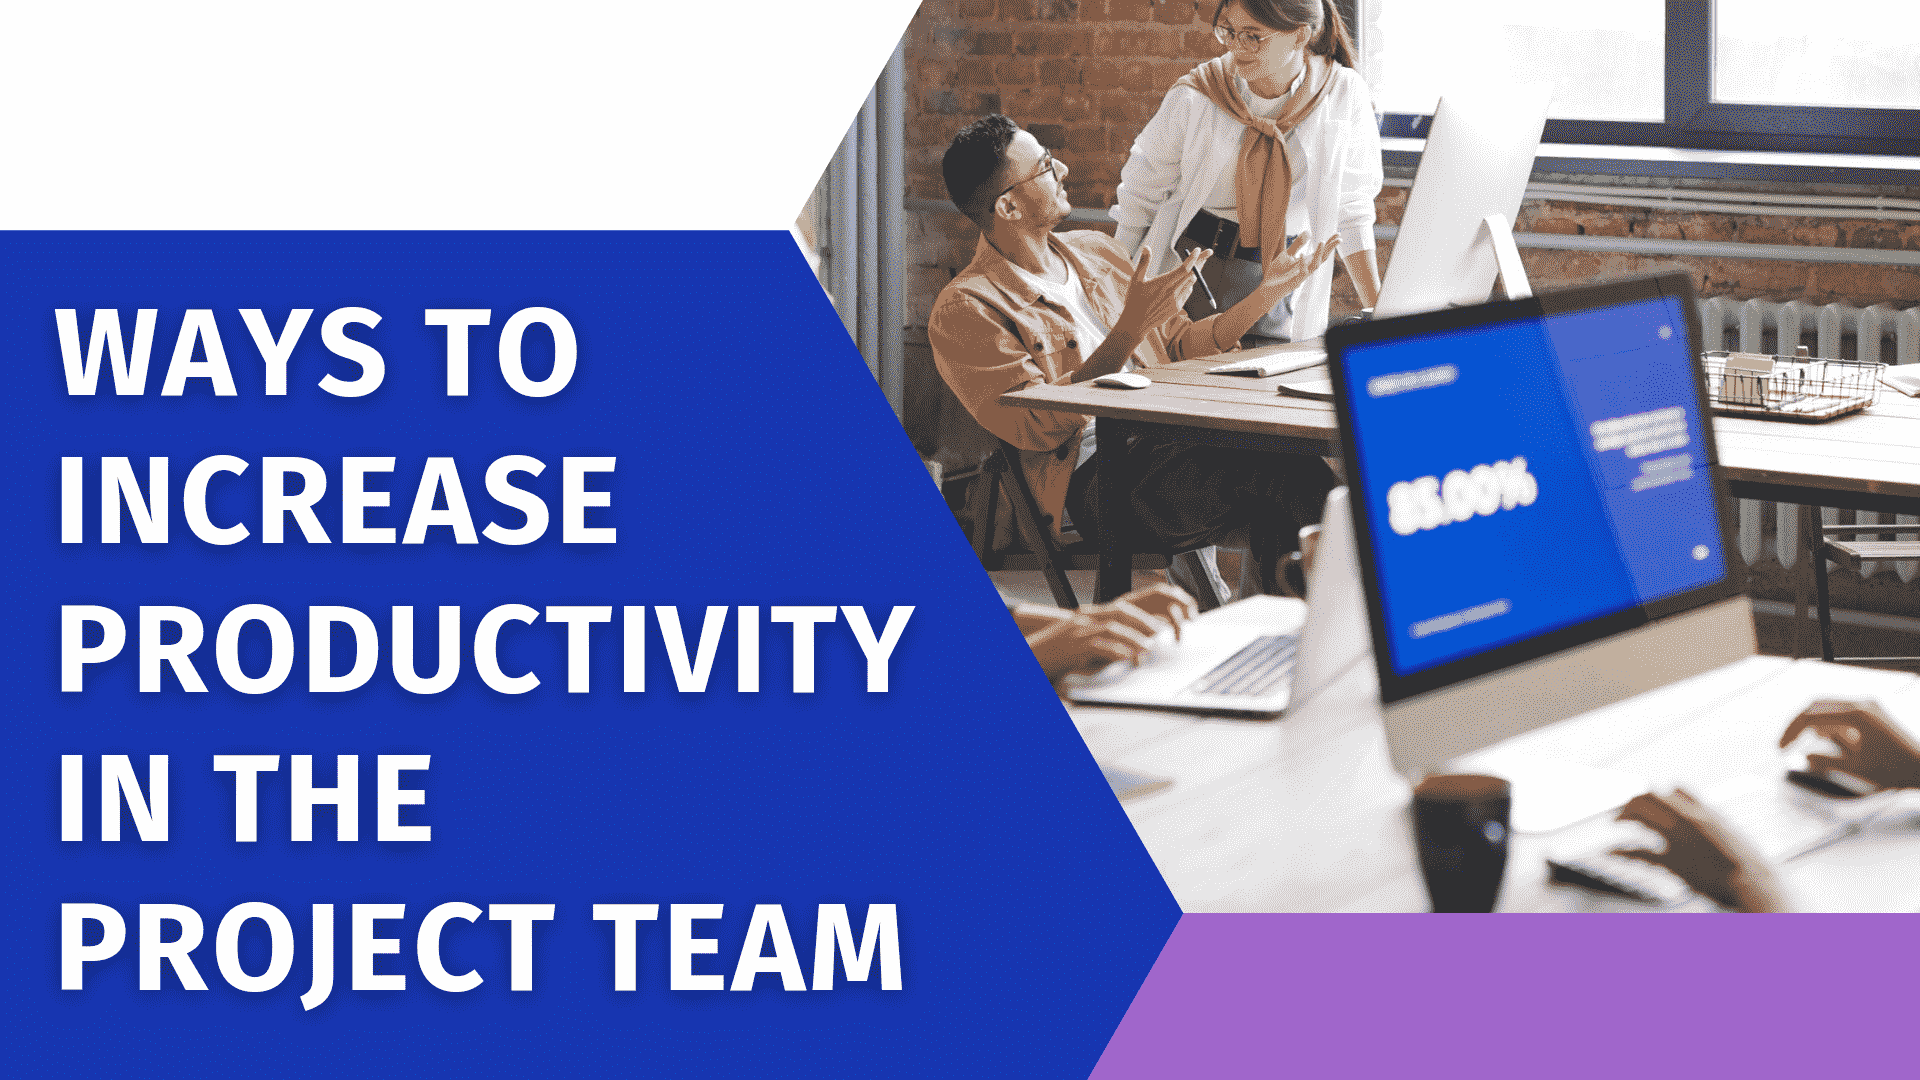 Ways to Increase Productivity in a Project Team